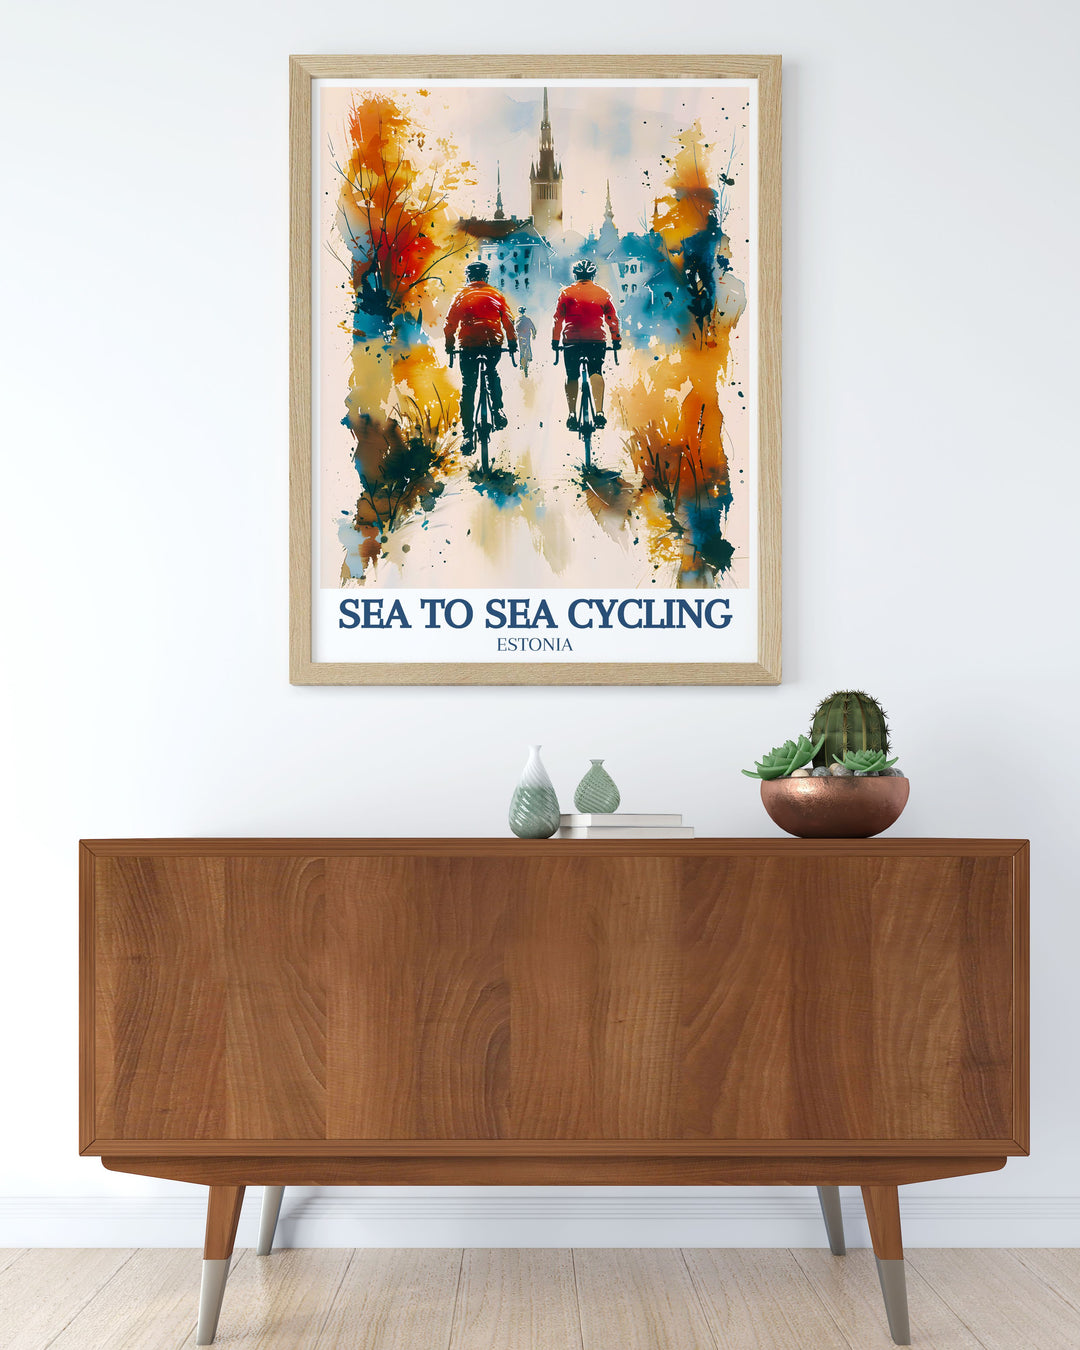 Experience the thrill of the Sea to Sea Cycling Route and the enchanting Old Town of Tallinn with this detailed poster, highlighting the scenic views from Englands Lake District to the medieval streets of Estonia, ideal for any cycling themed home decor.